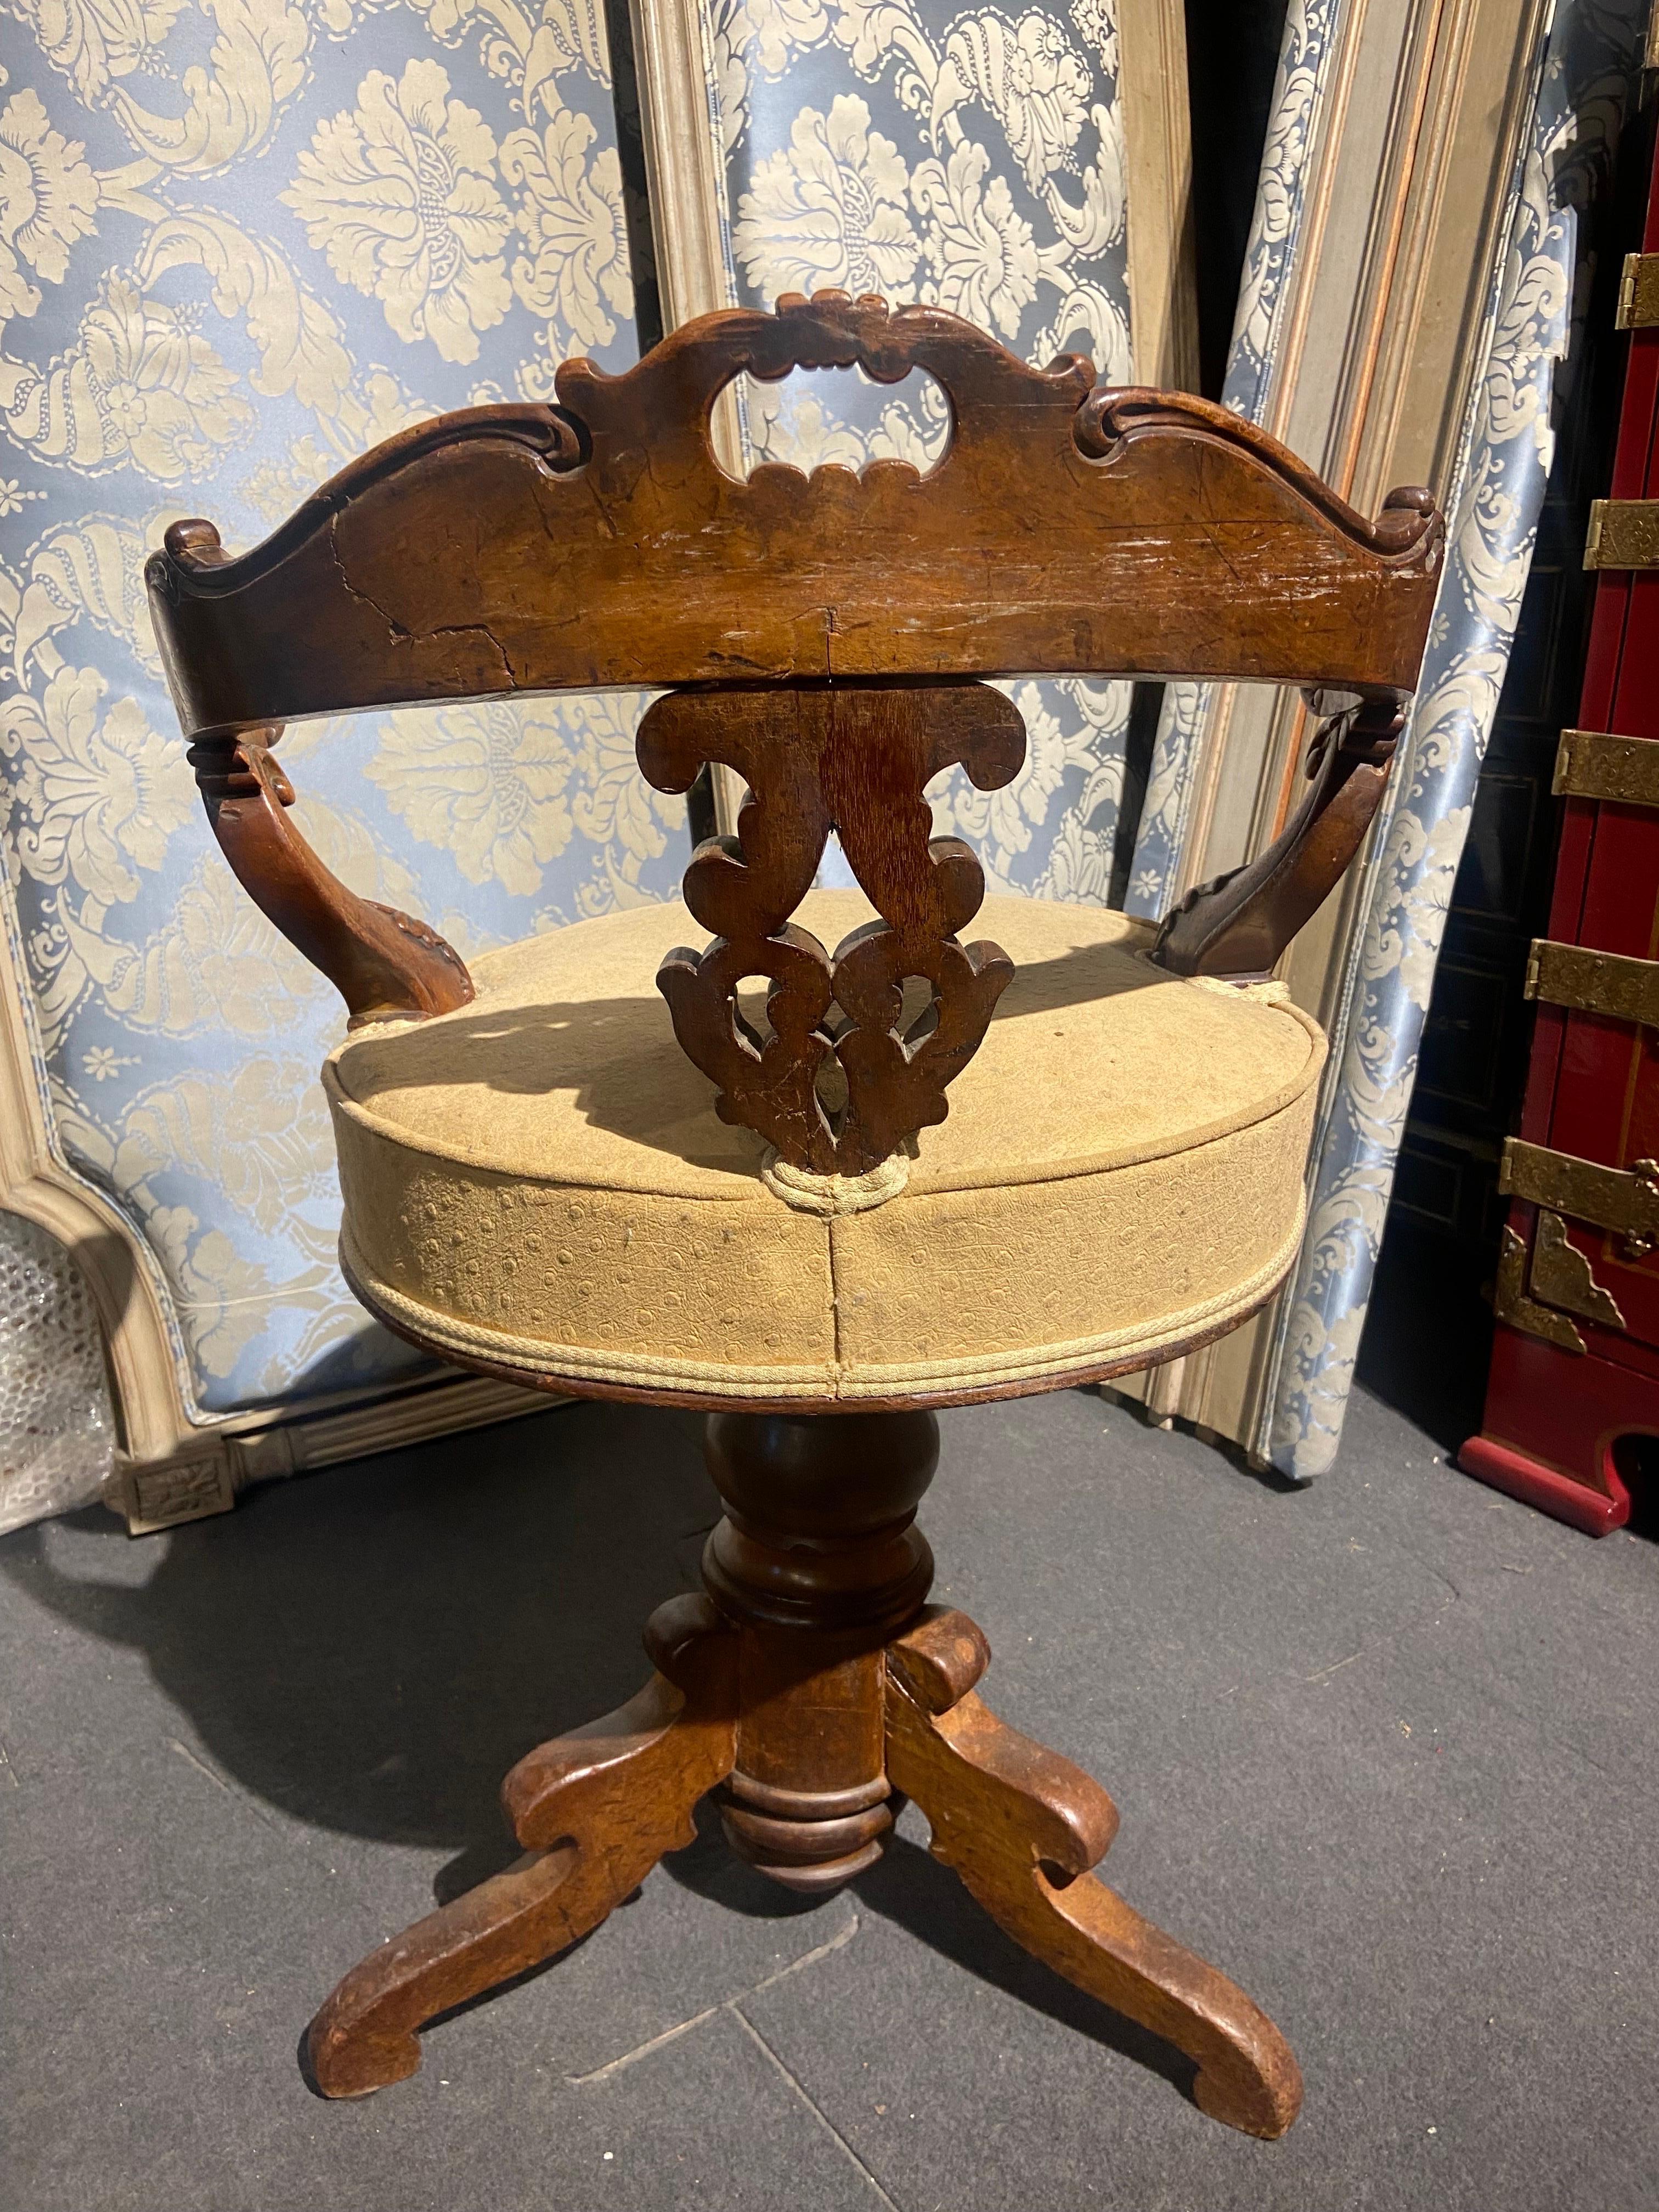 Very delicate and rare hand carved wooden piano swivel chair made in mid 19th century during Napoleon III period. Having no restoration so far the chair is even still wearing in its original ostrich upholstery. The back of the chair is curved and